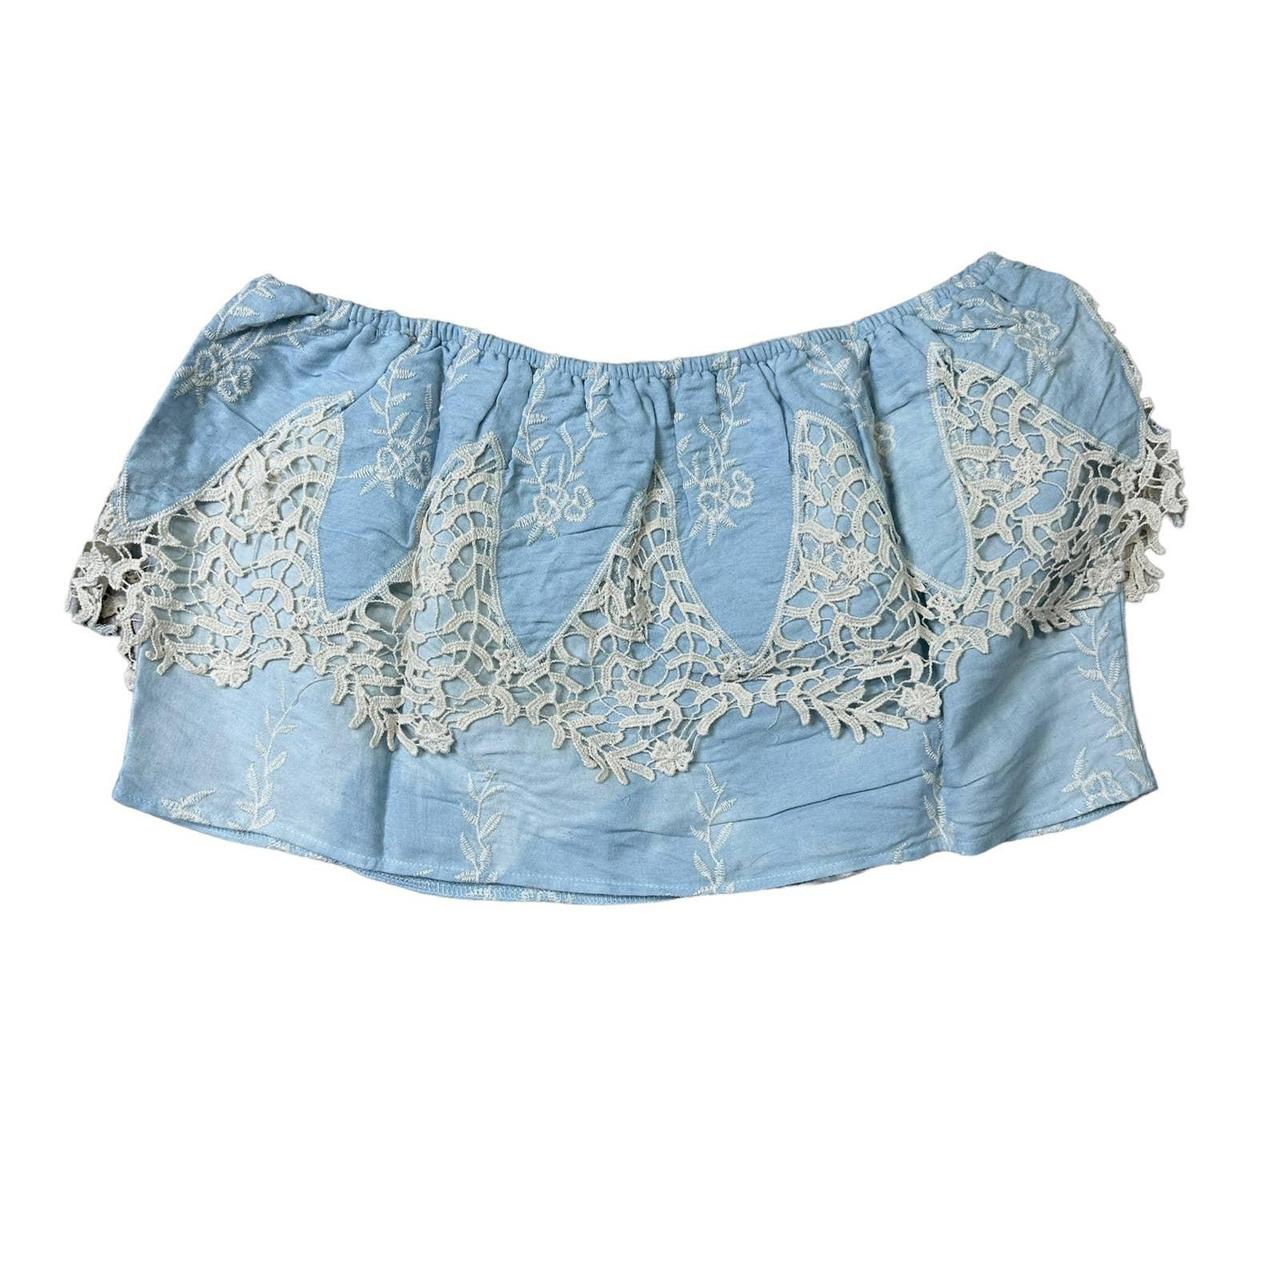 EMBROIDERED CROP TOP IN LACE - BABY BLUE